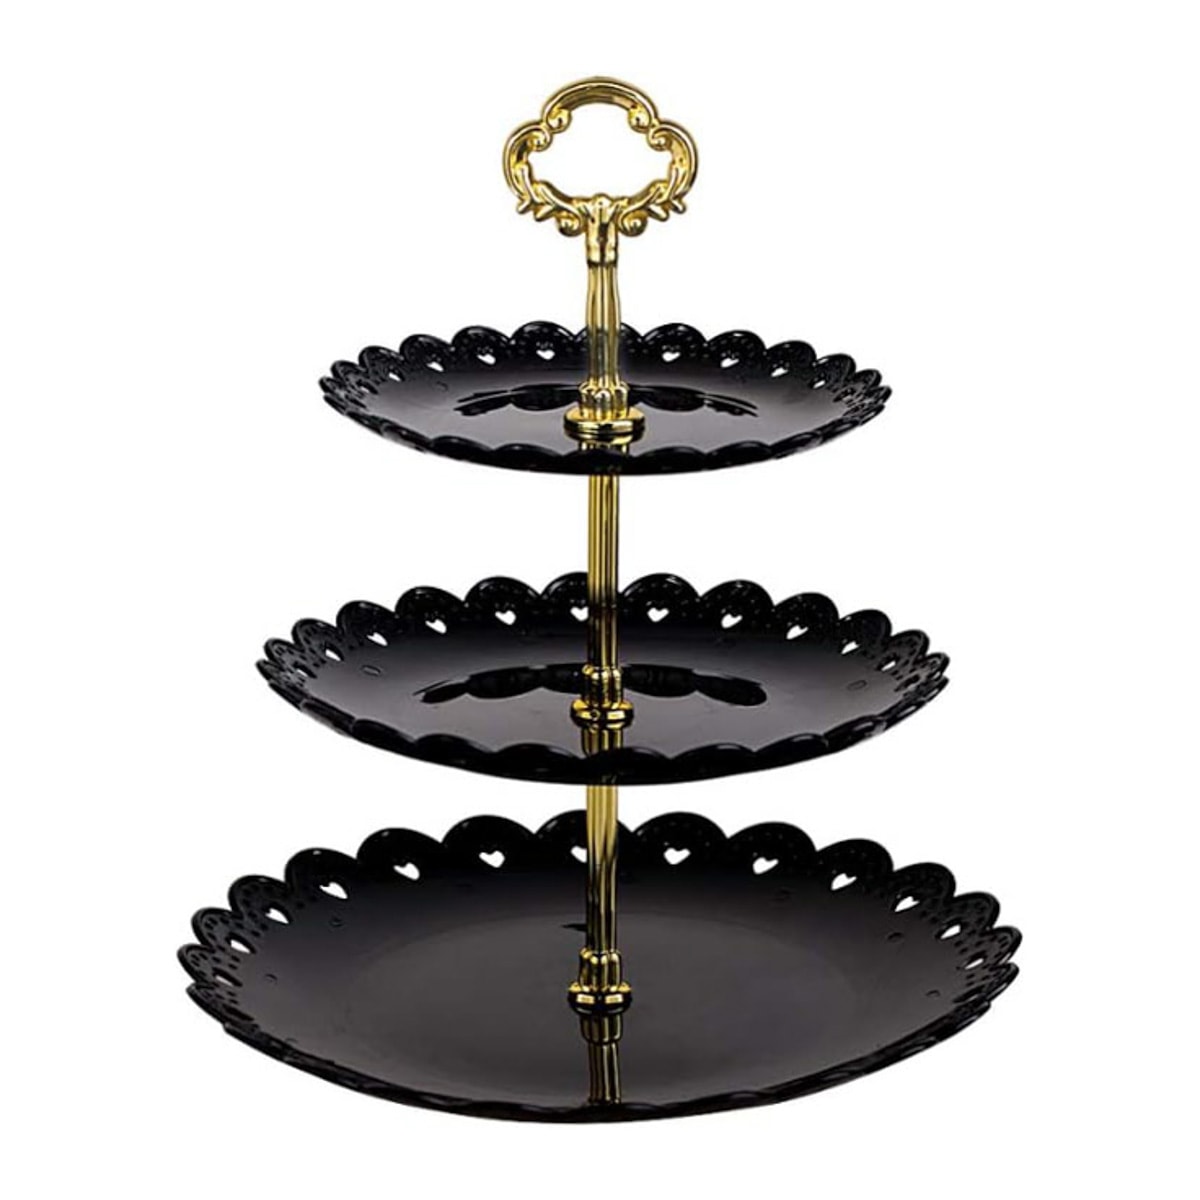 Black 3-tiered serving stand.